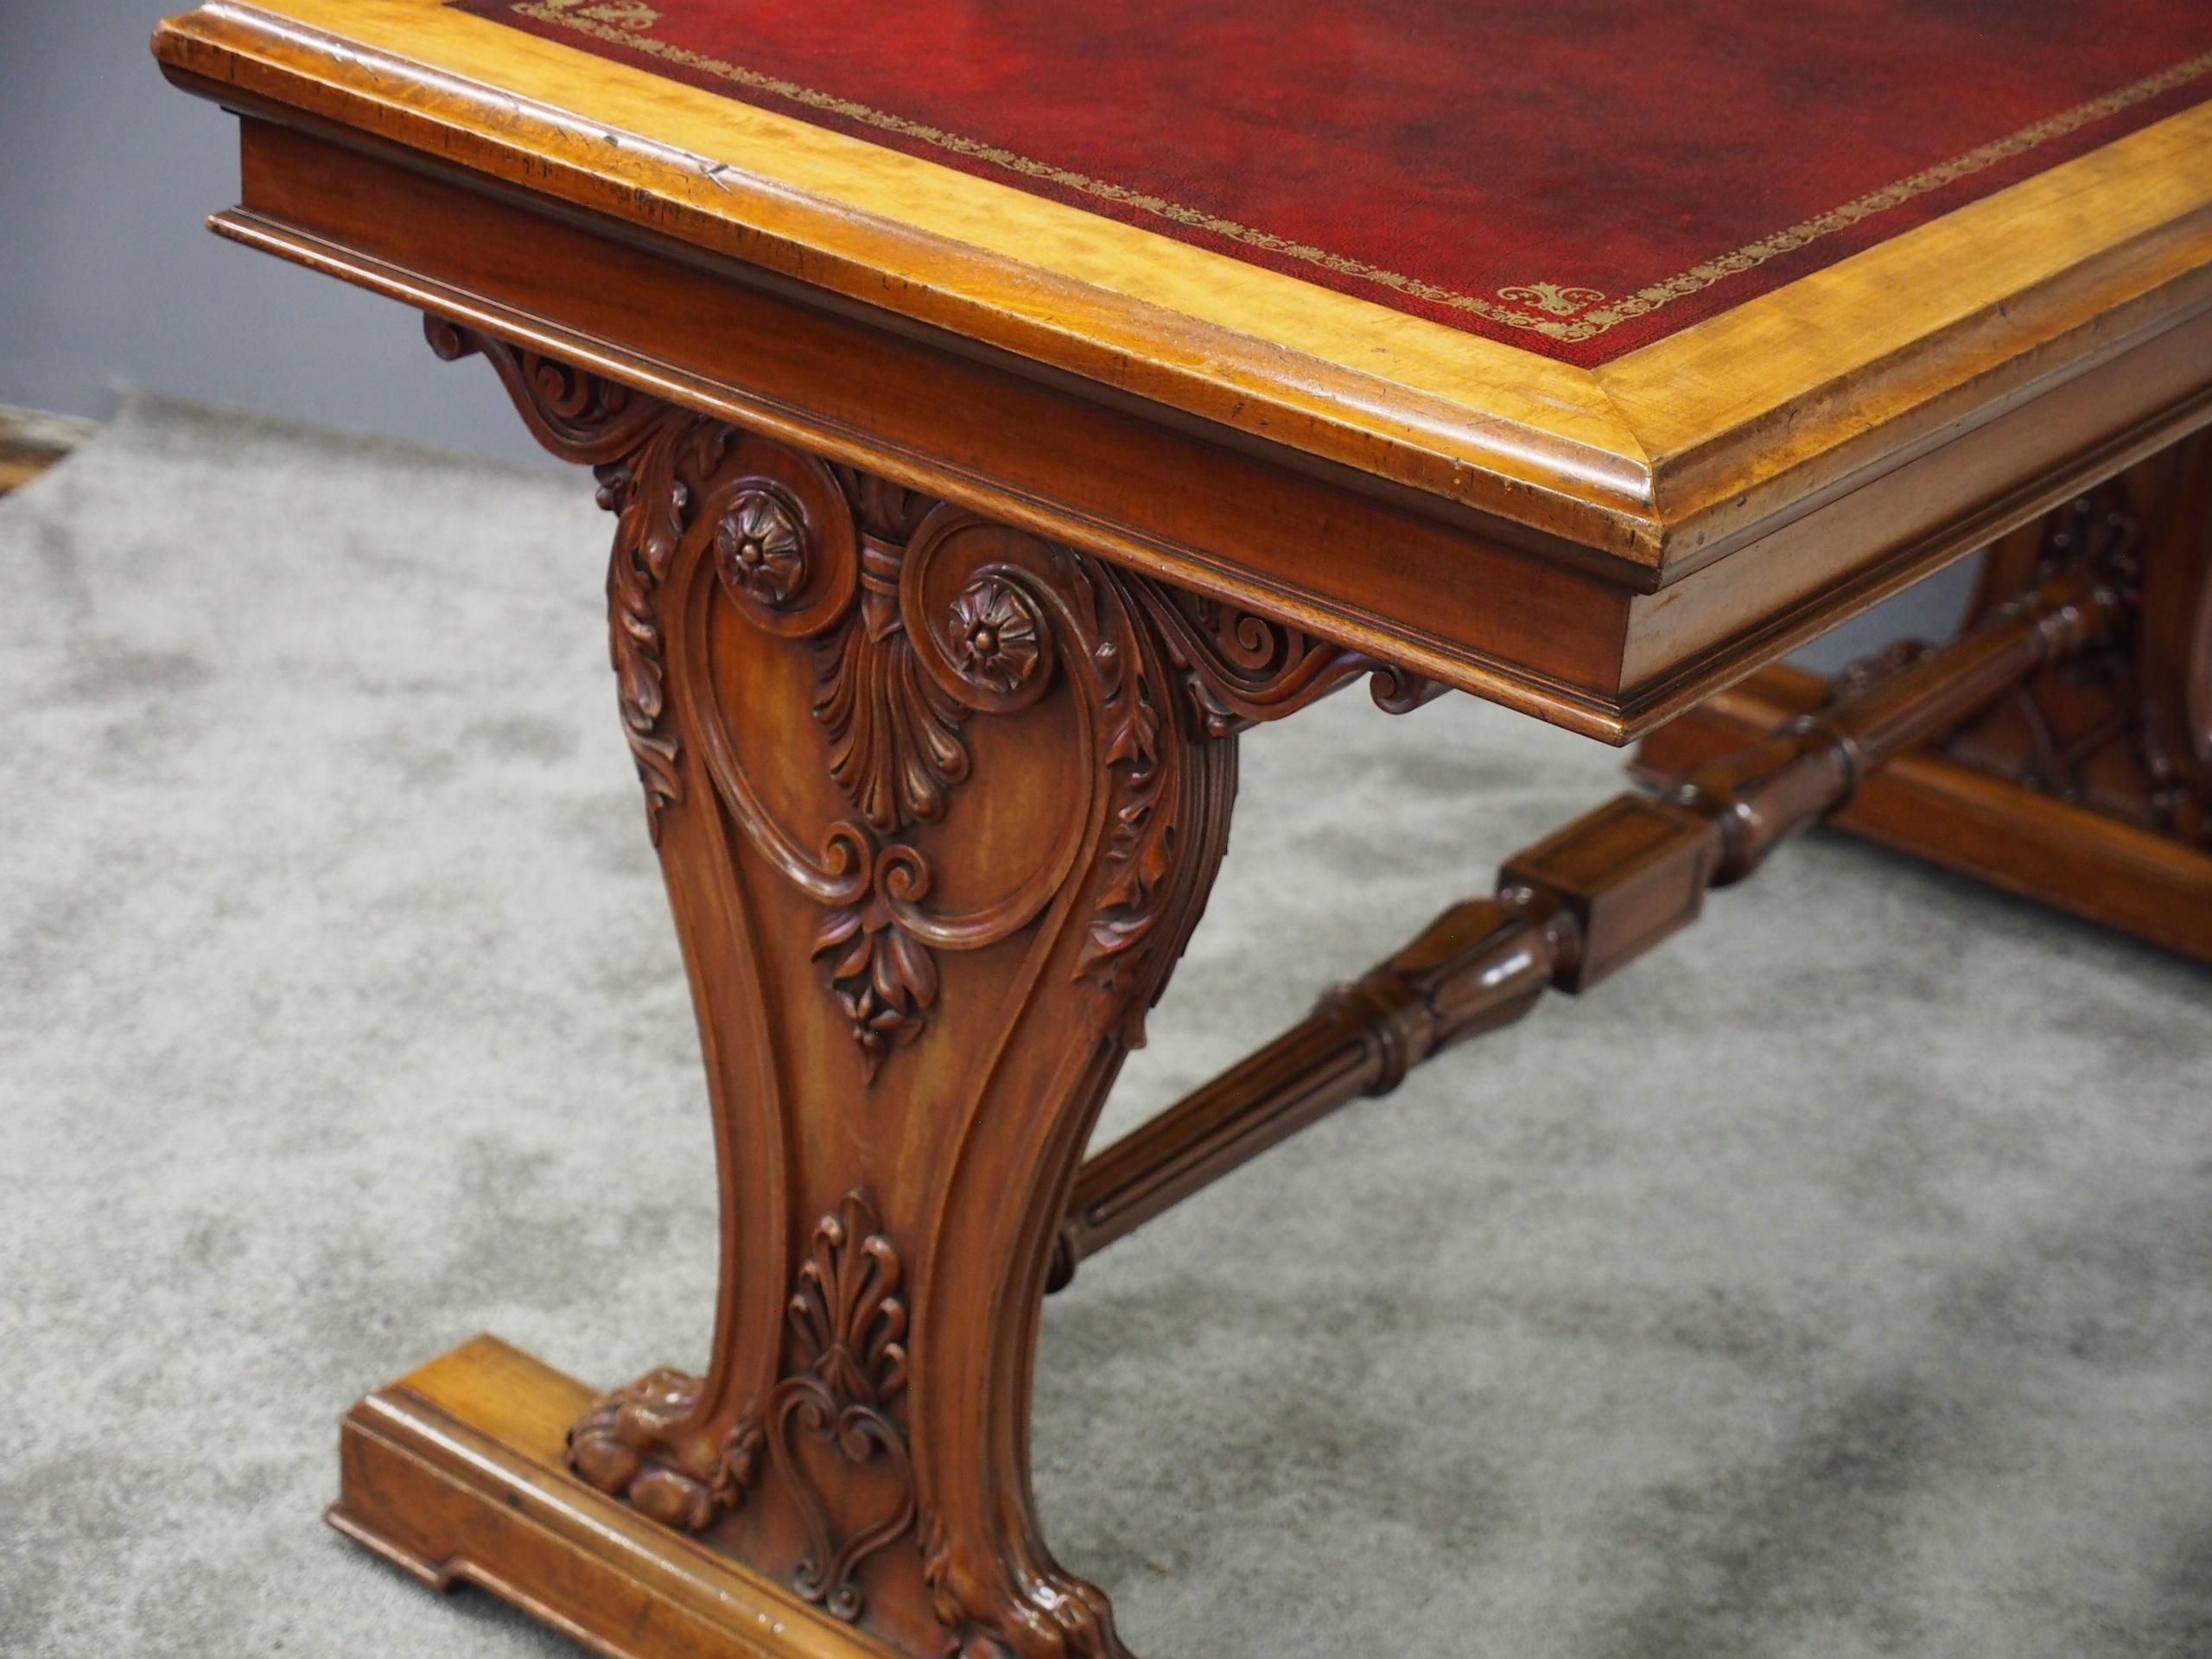 Freestanding George IV mahogany library table, circa 1830. The rectangular top with thumb-moulded edge and new gilt-tooled red leather writing surface over a narrow beaded frieze. This is supported on Renaissance style trestles with deeply carved